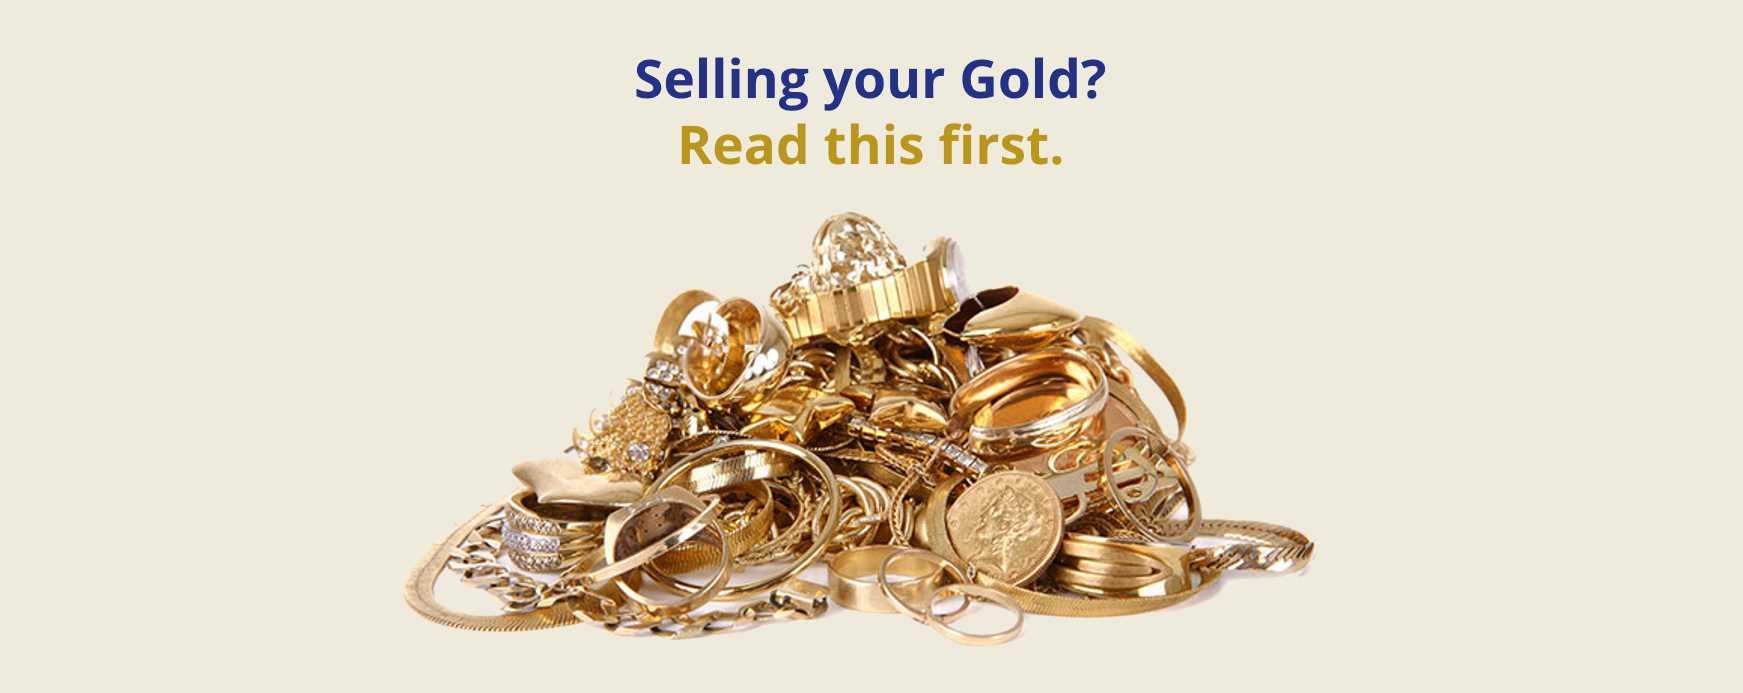 How to Sell Your Gold